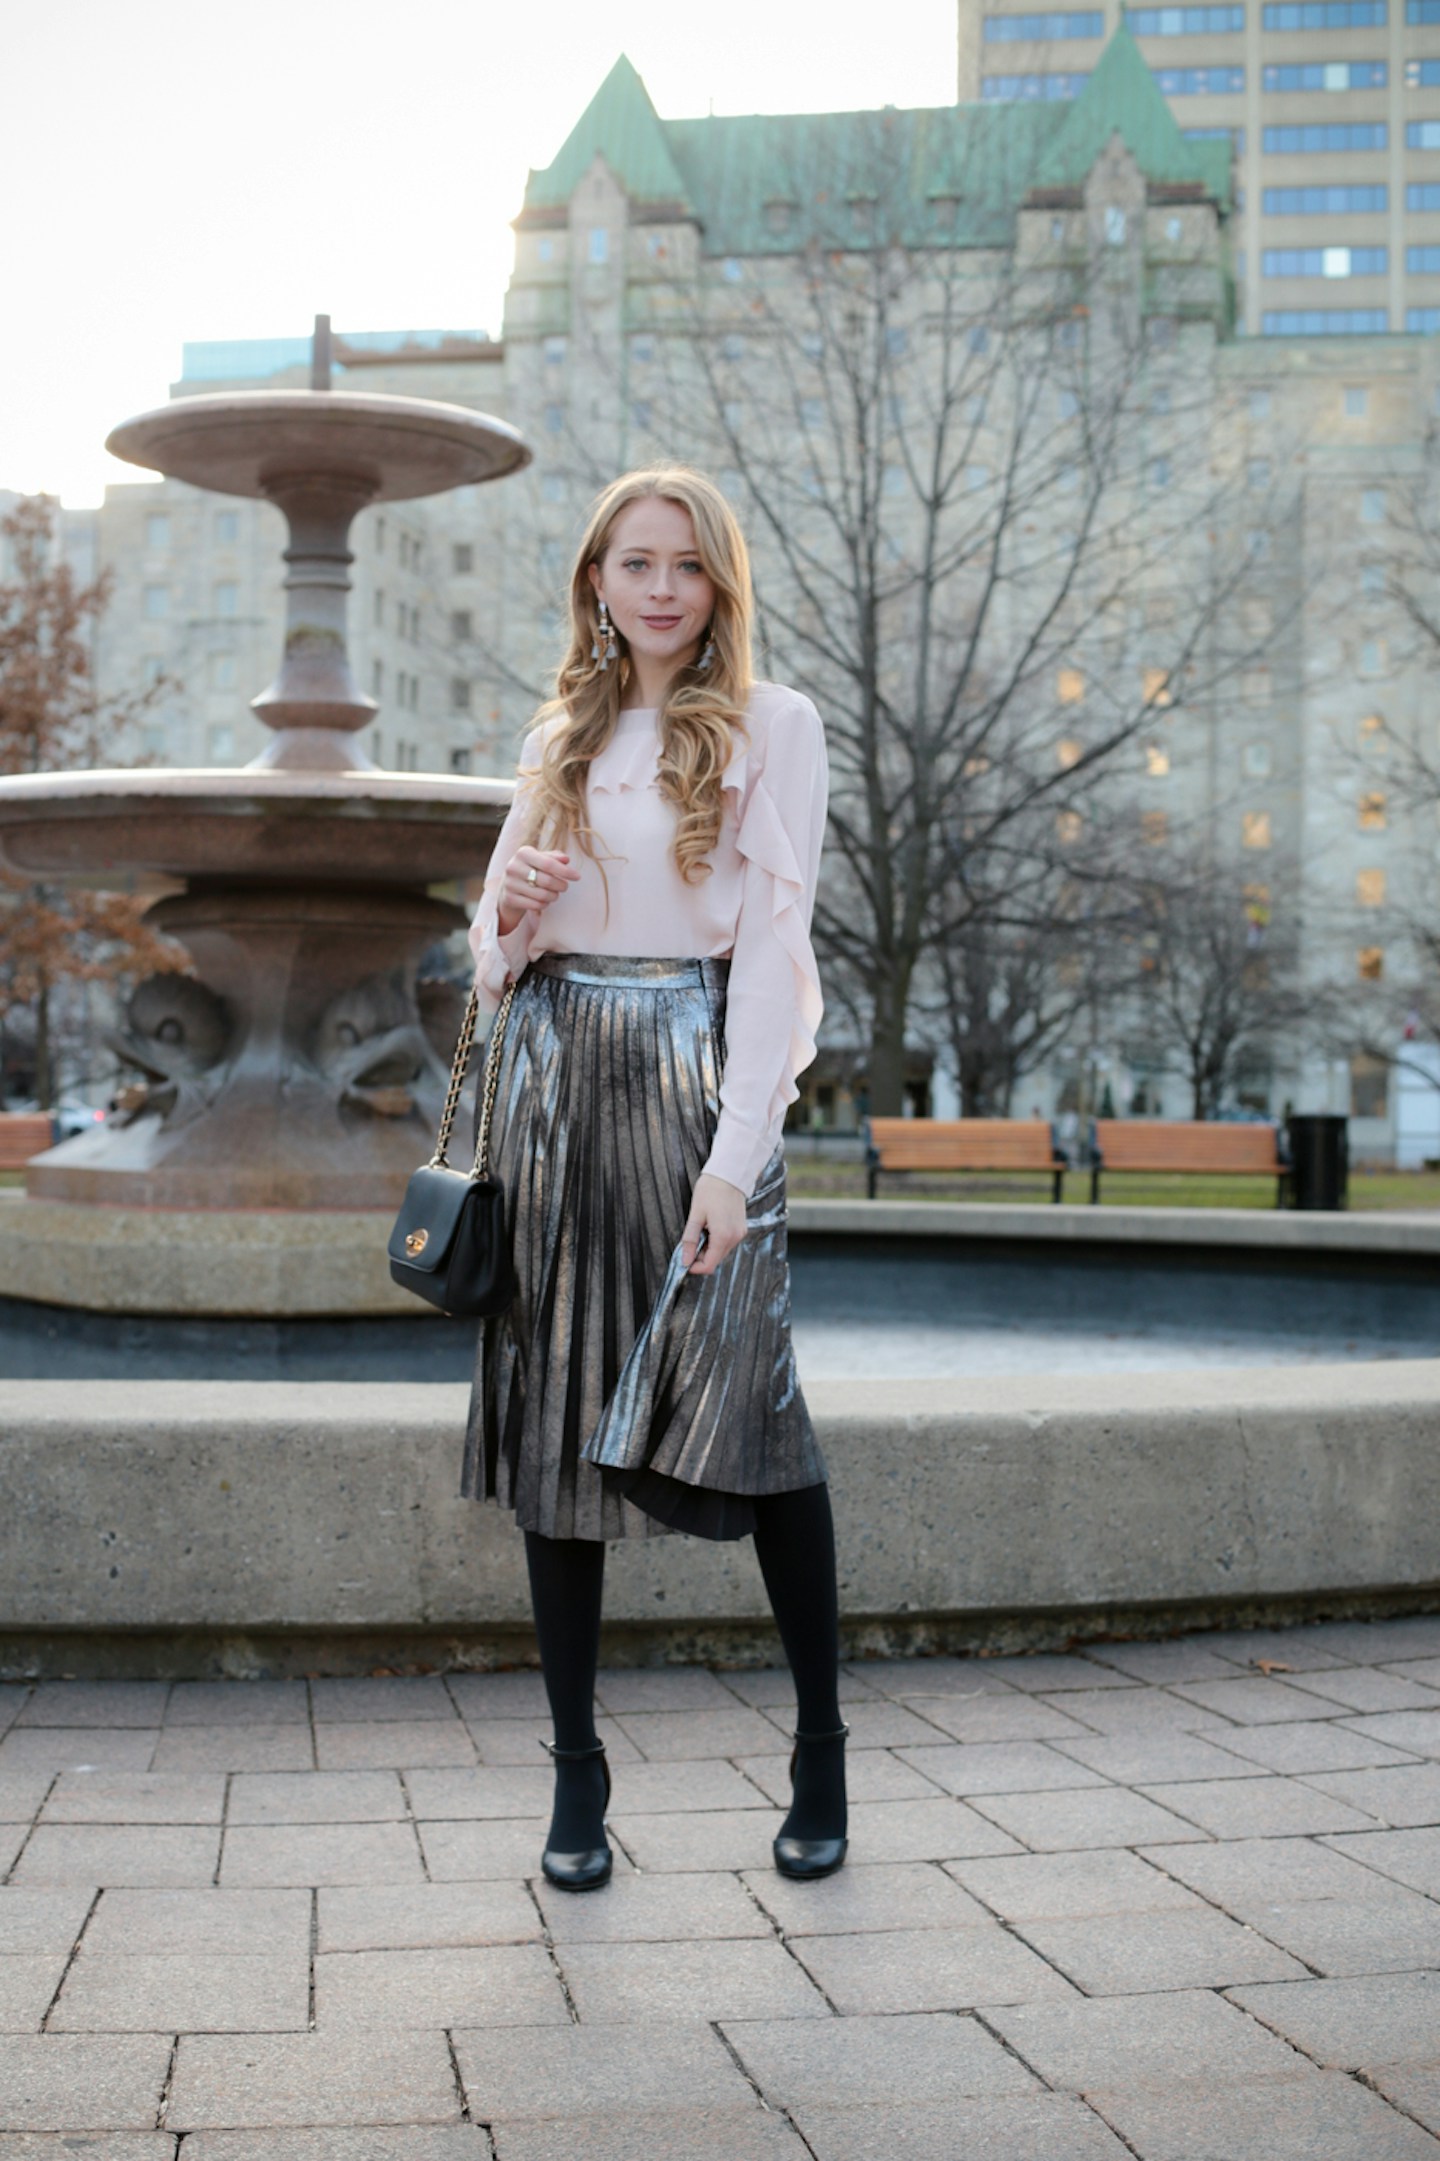 How to style a metallic pleated skirt